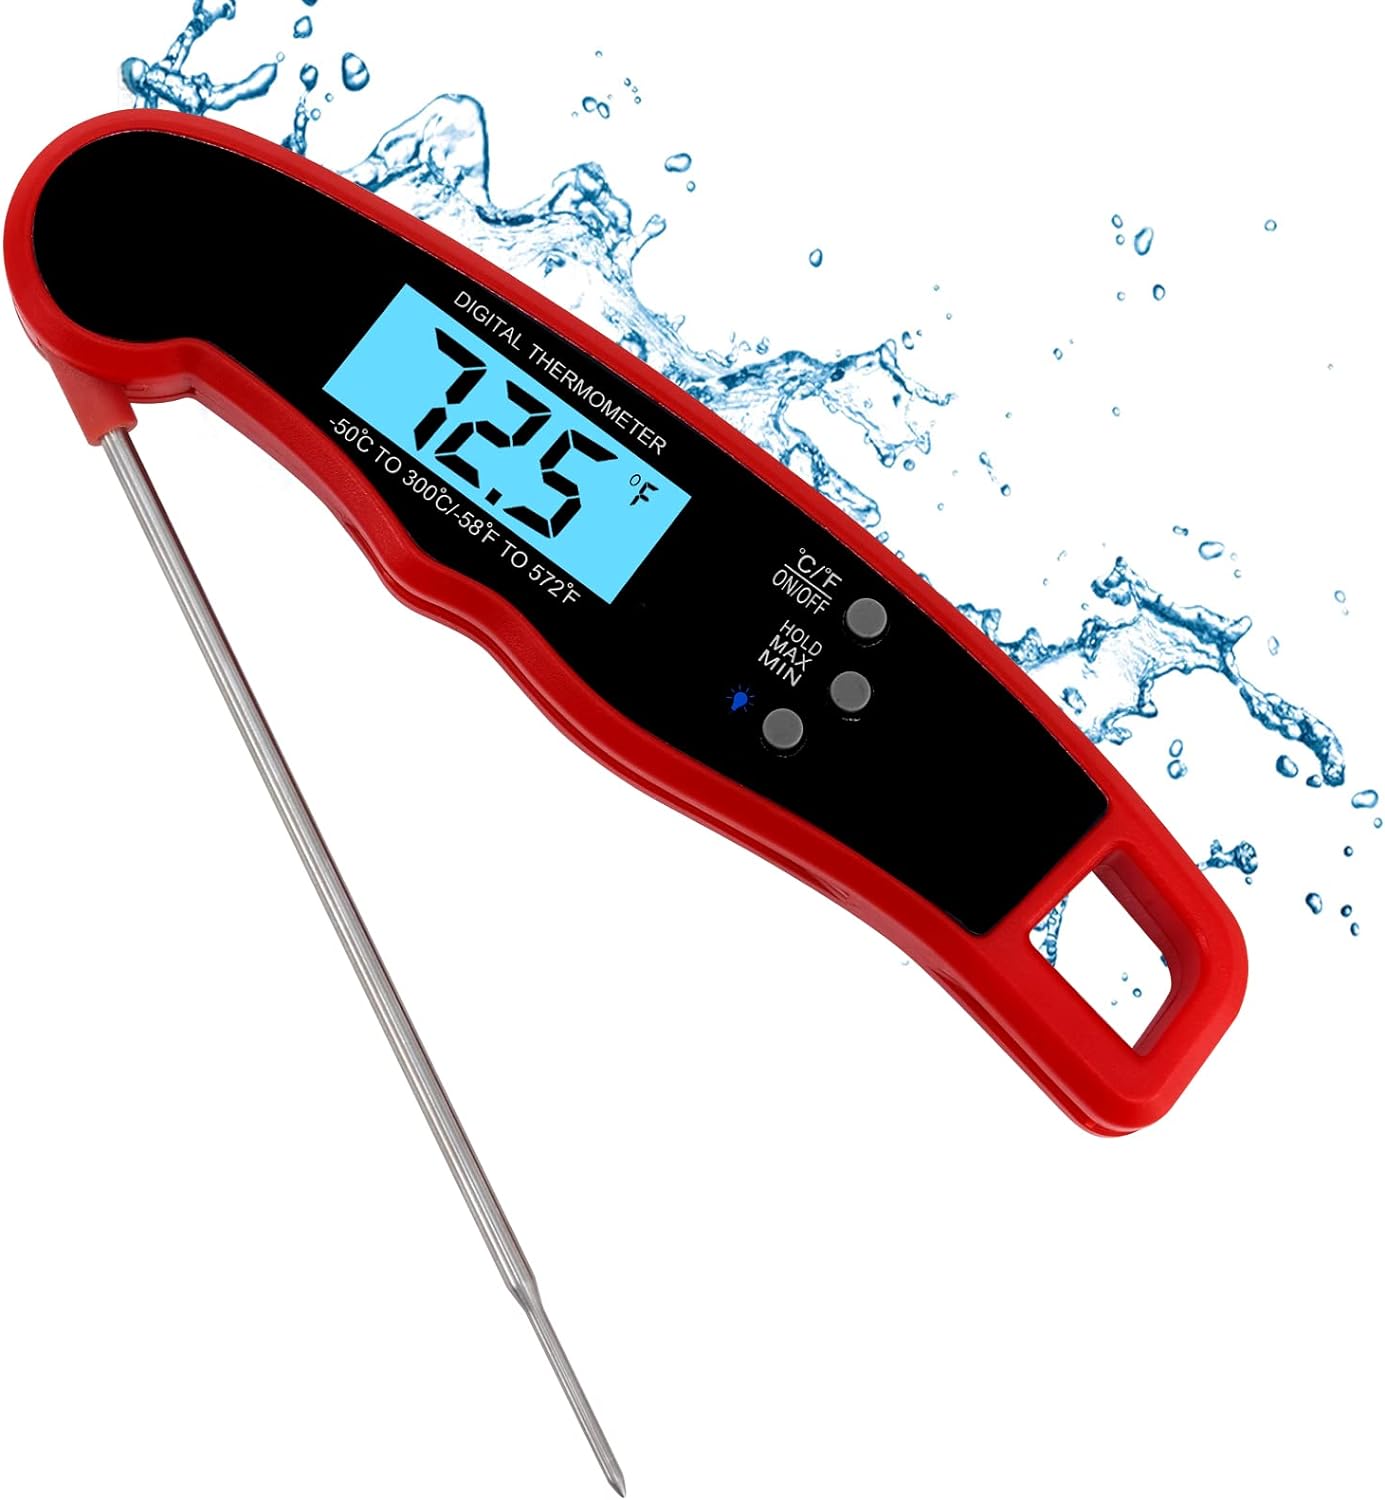 YLMIJFE Meat Thermometer,Meat Thermometer Digital,Waterproof and Backlight Instant Read Meat Thermometer for Grill and Cooking.Digital Food Probe for Kitchen, Outdoor Grilling and BBQ!